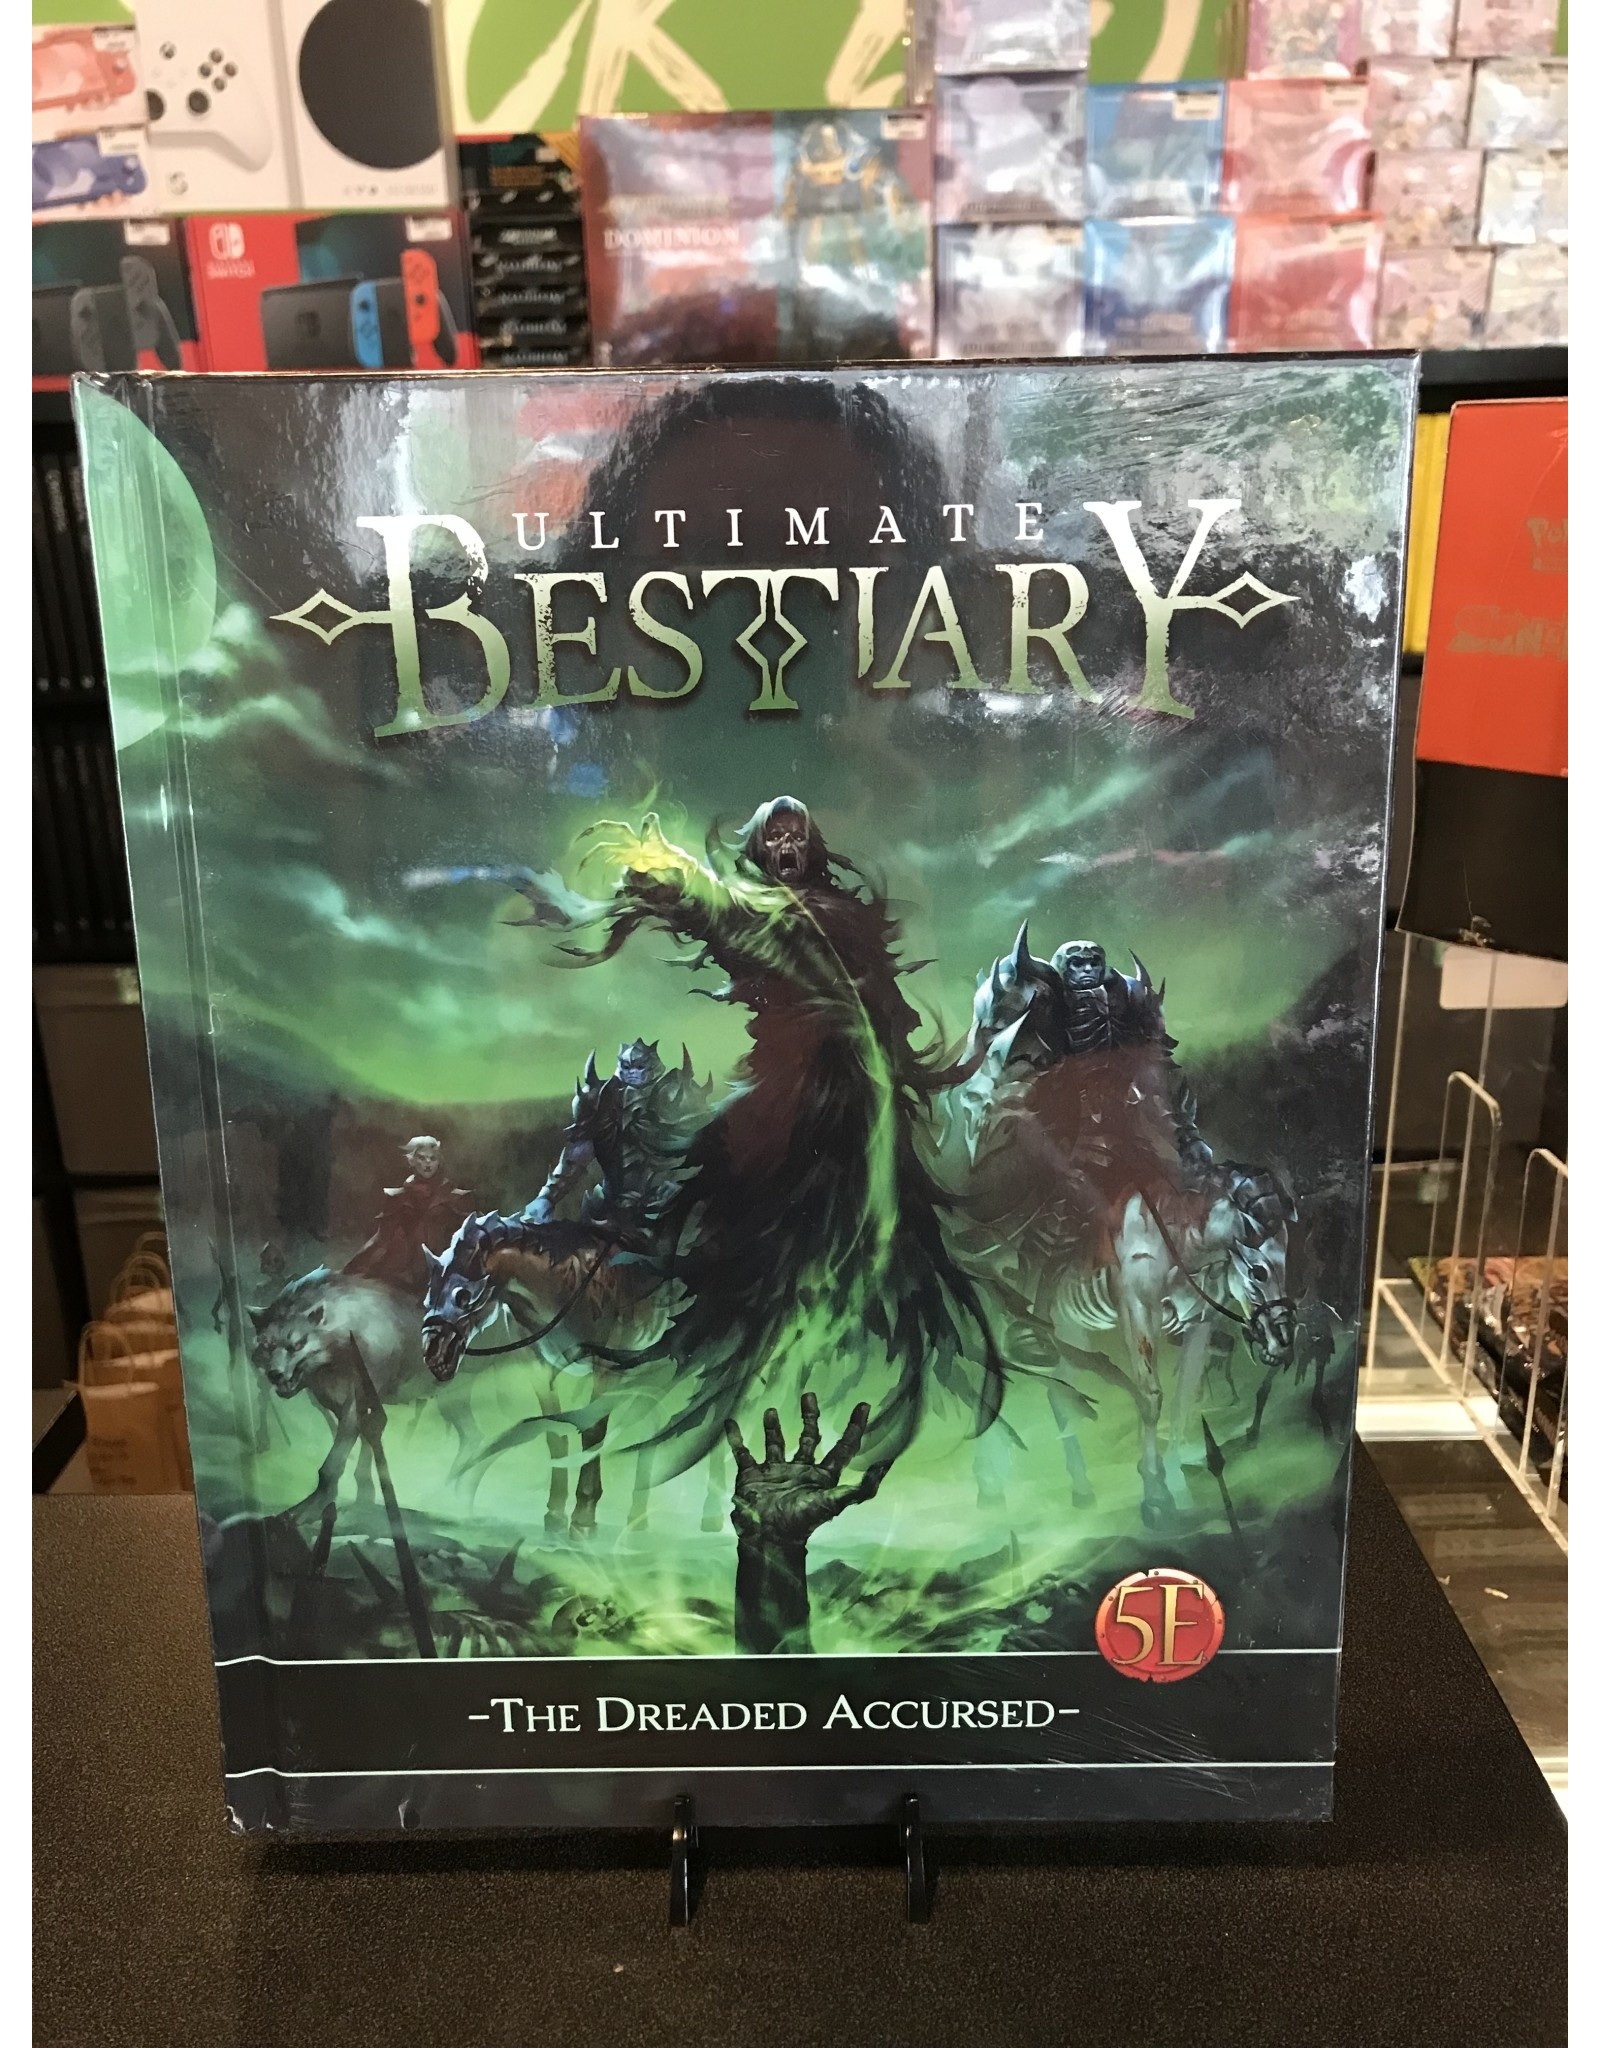 5E Compatible Books ULTIMATE BESTIARY: THE DREADED ACCURSED HC (5)